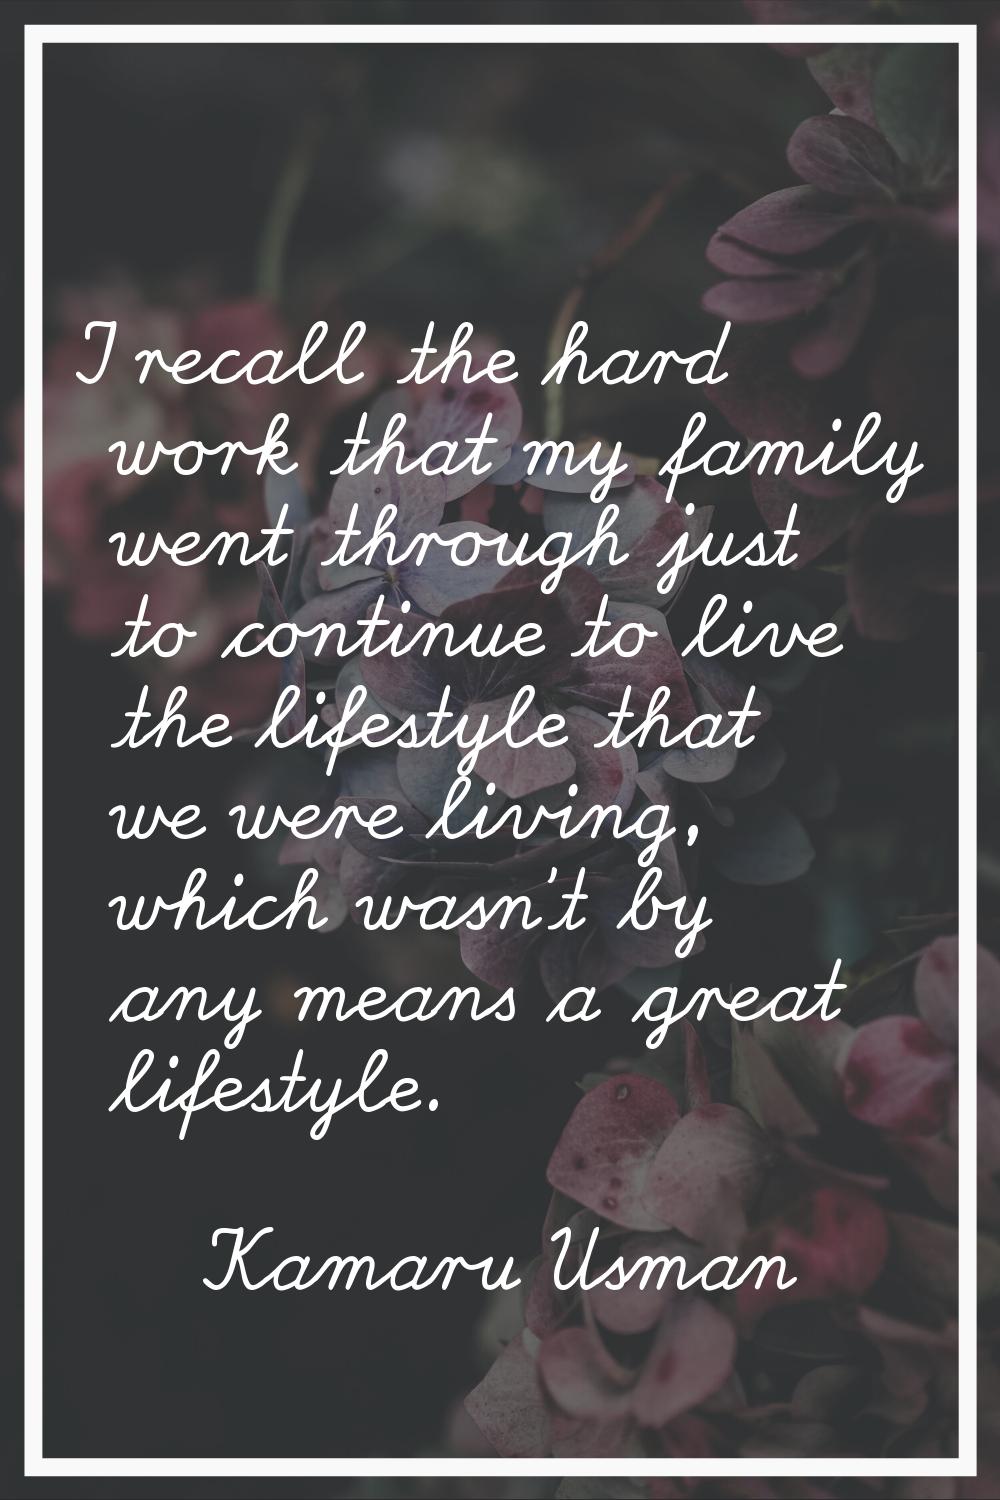 I recall the hard work that my family went through just to continue to live the lifestyle that we w